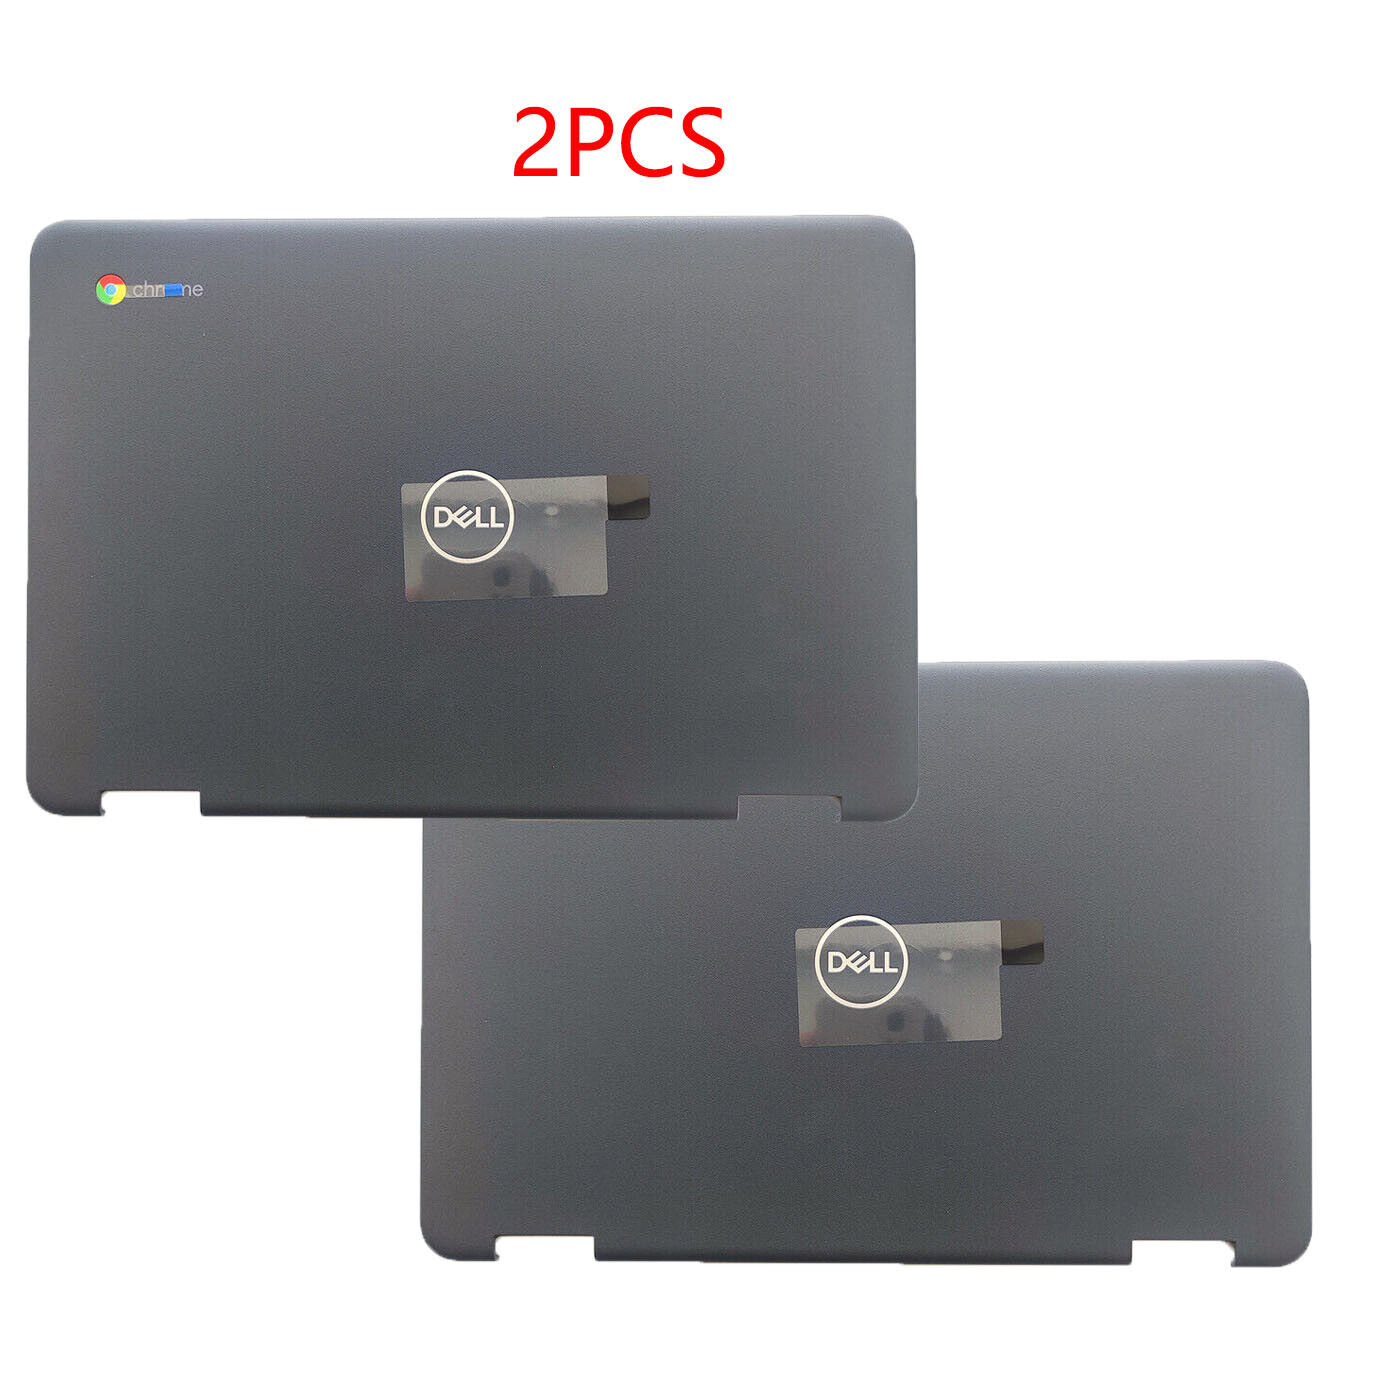 2PCS LCD Back Cover Top Case For Dell Chromebook 11 3100 3110 3111 2-in-1